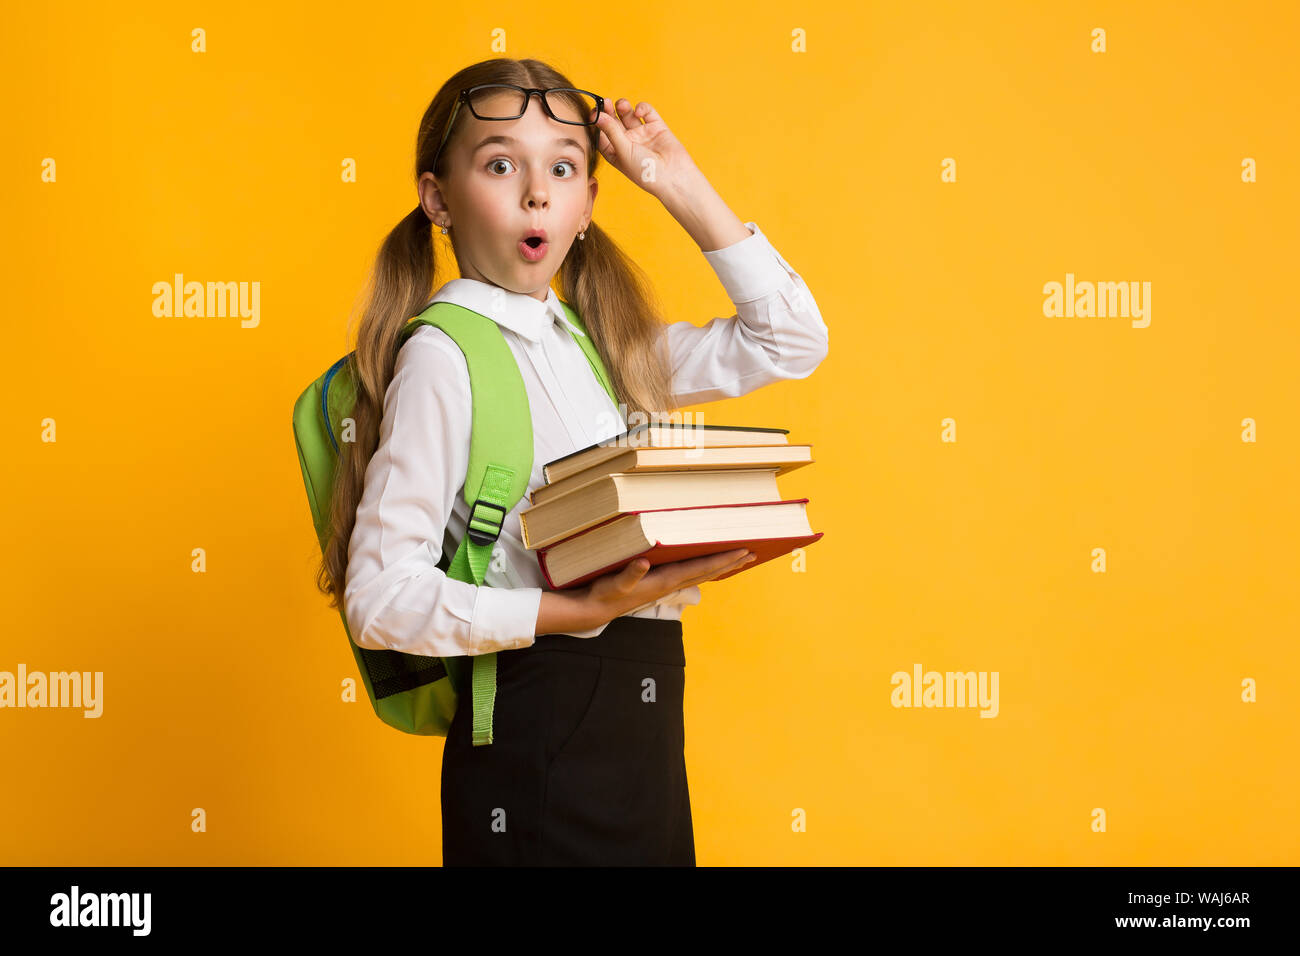 Shocked Primary School Girl Holding Stack Of Books, Yellow Background Stock Photo